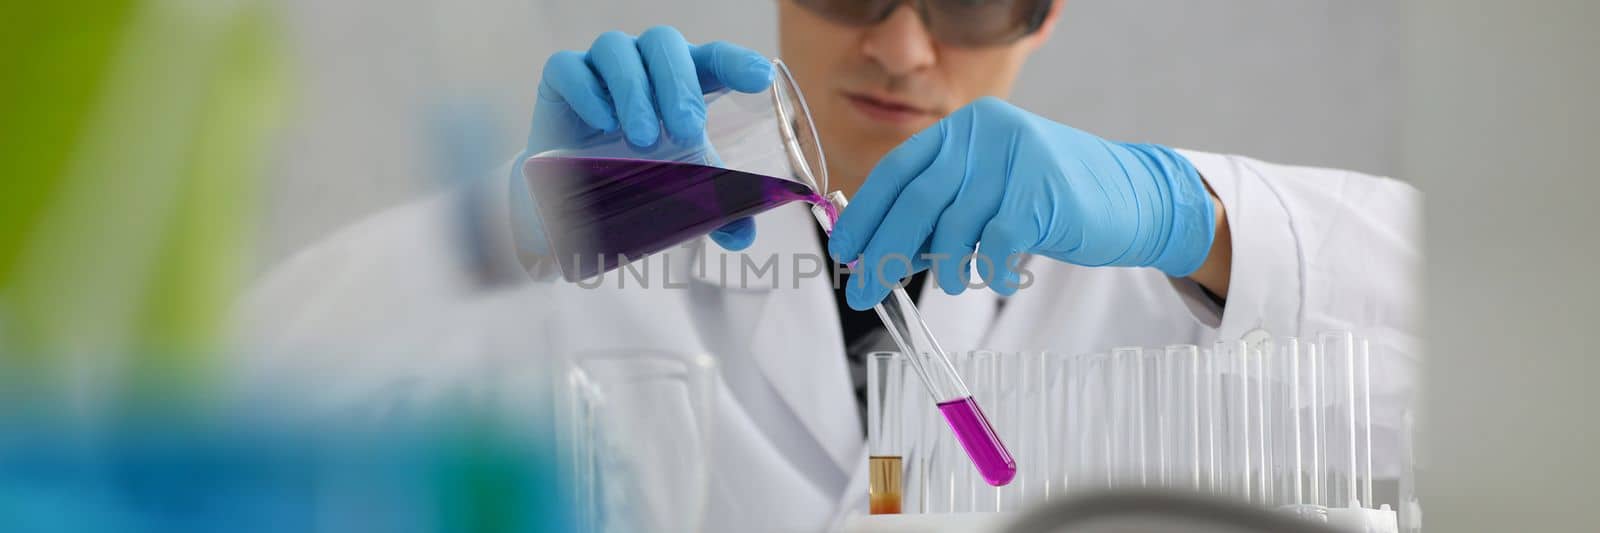 Scientist in protective gloves holding test tube of purple liquid. Laboratory research of poisonous liquids concept